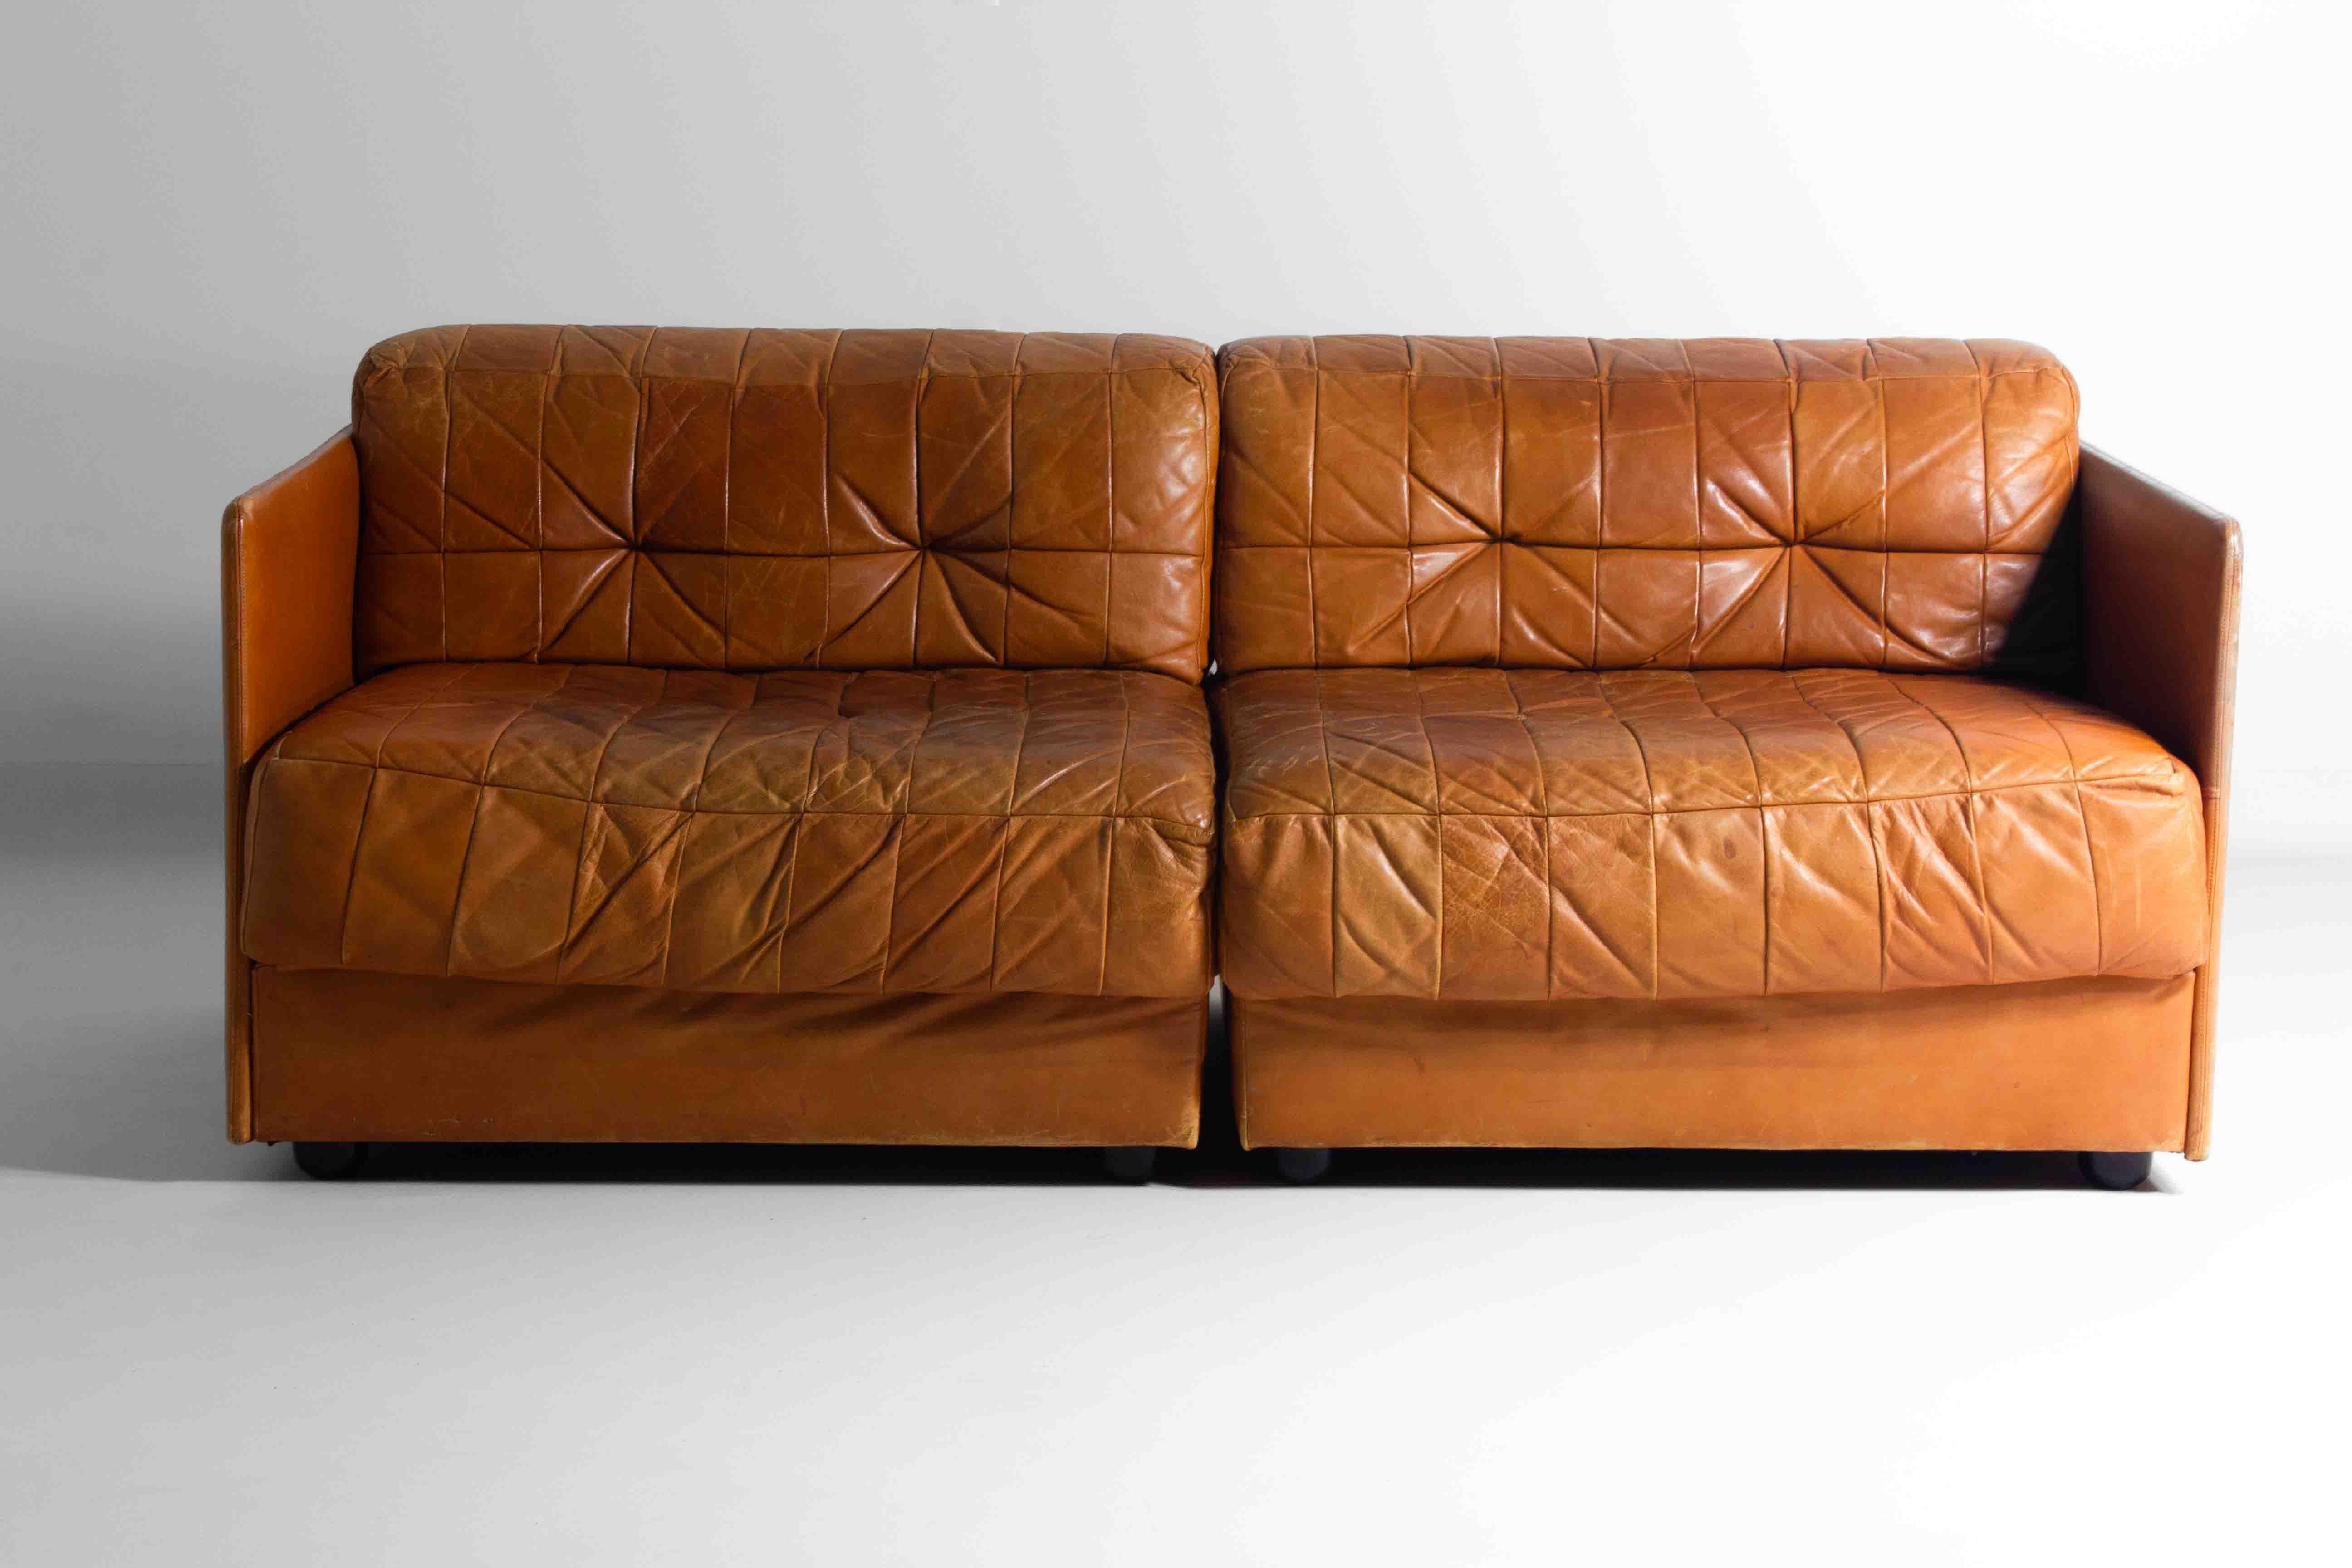 his sofa has a real vintage charm with its patchwork leather design. The caramel brown color gives it a warm, inviting look, and the way the patches are put together adds a unique character. It’s got that comfy, inviting vibe that makes you want to